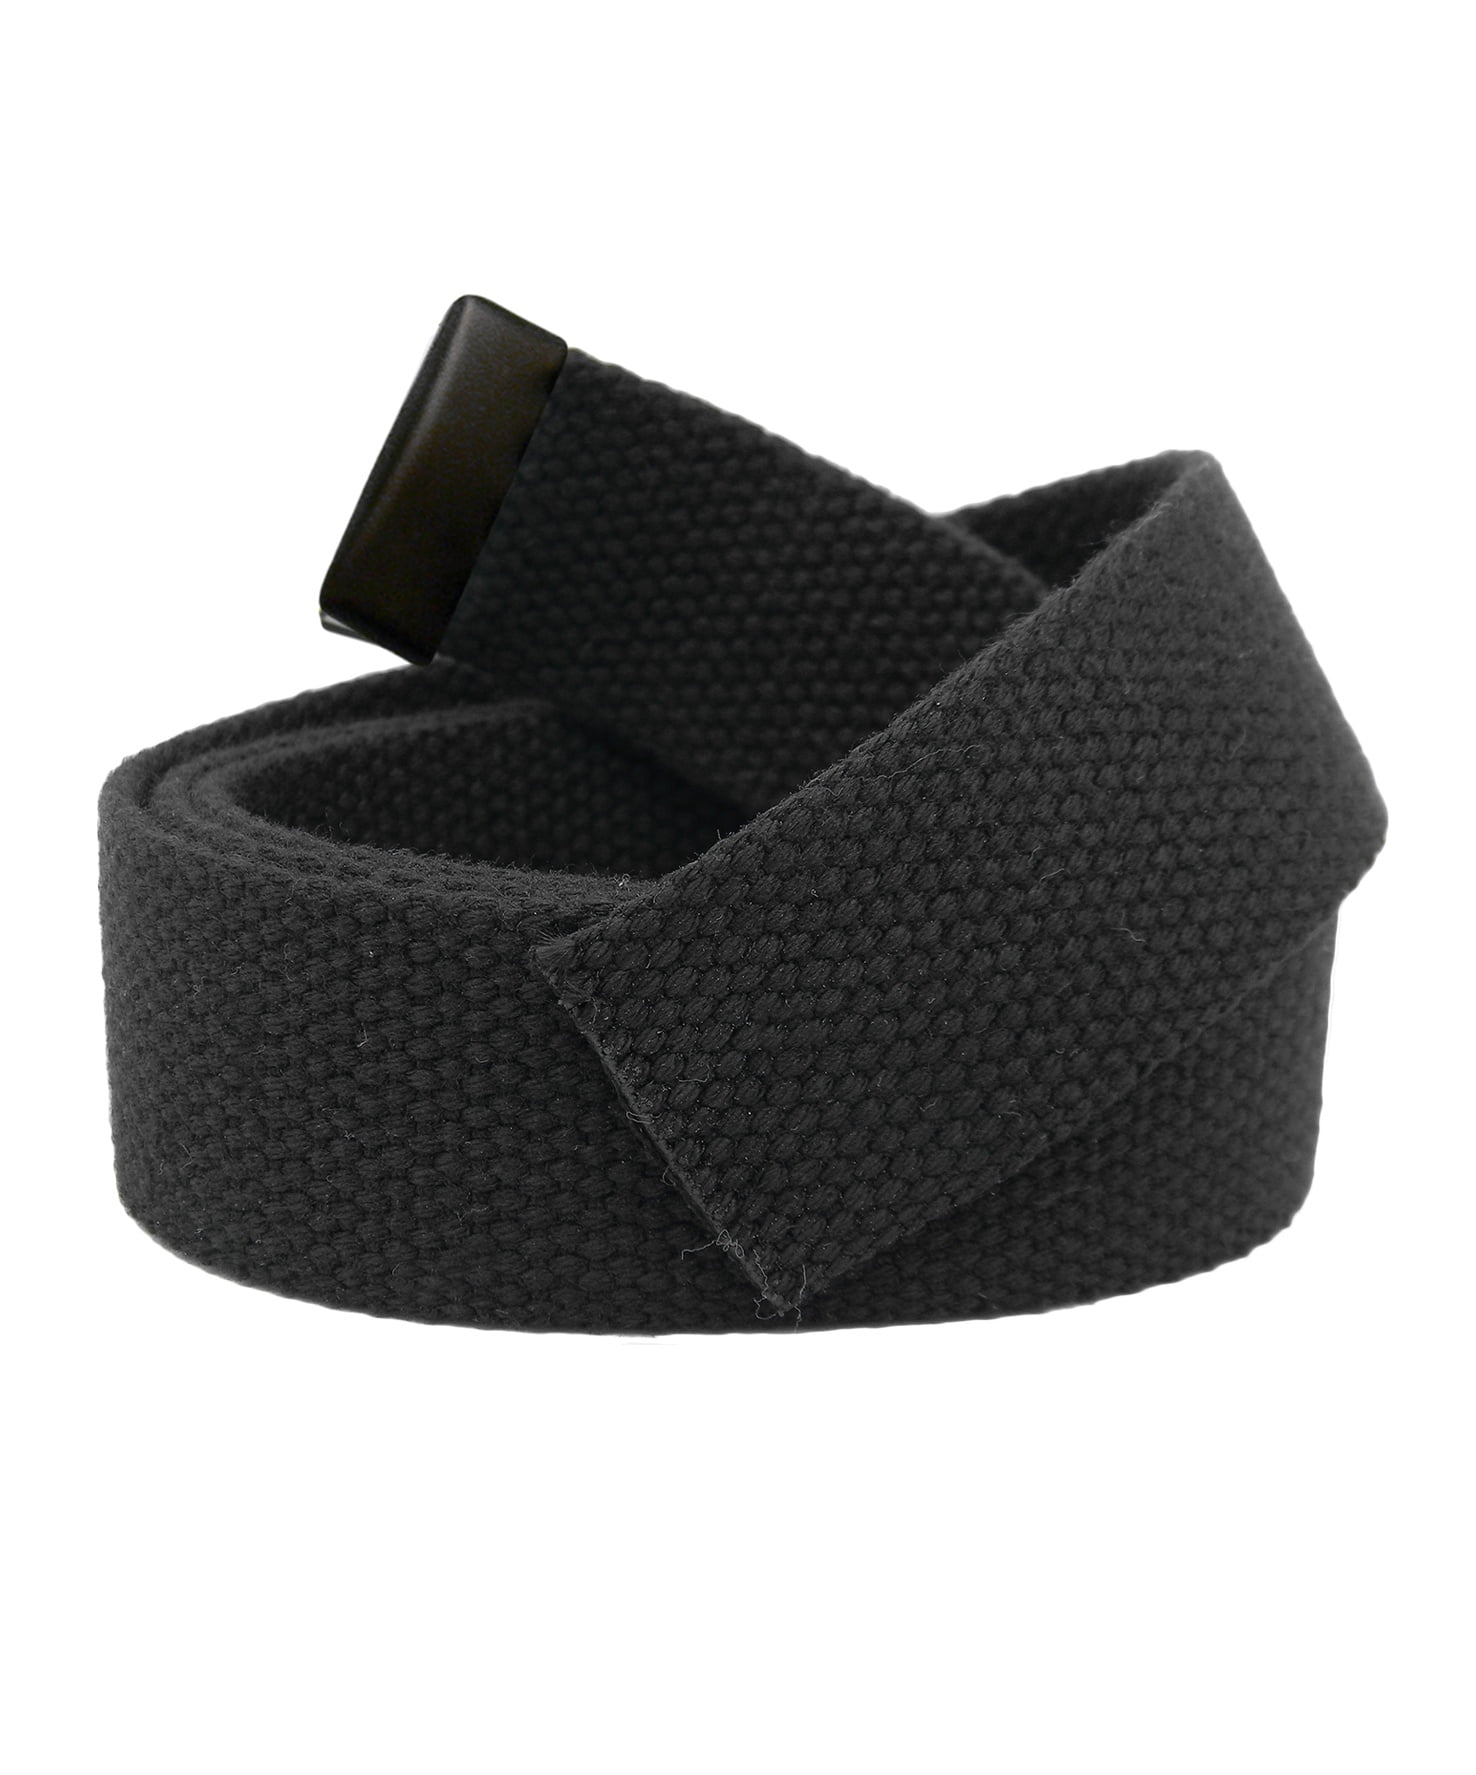 Loopbelt S 28-32 No Scratch Reversible Web Belt with Advanced Hook & Loop  Fasteners at  Men's Clothing store